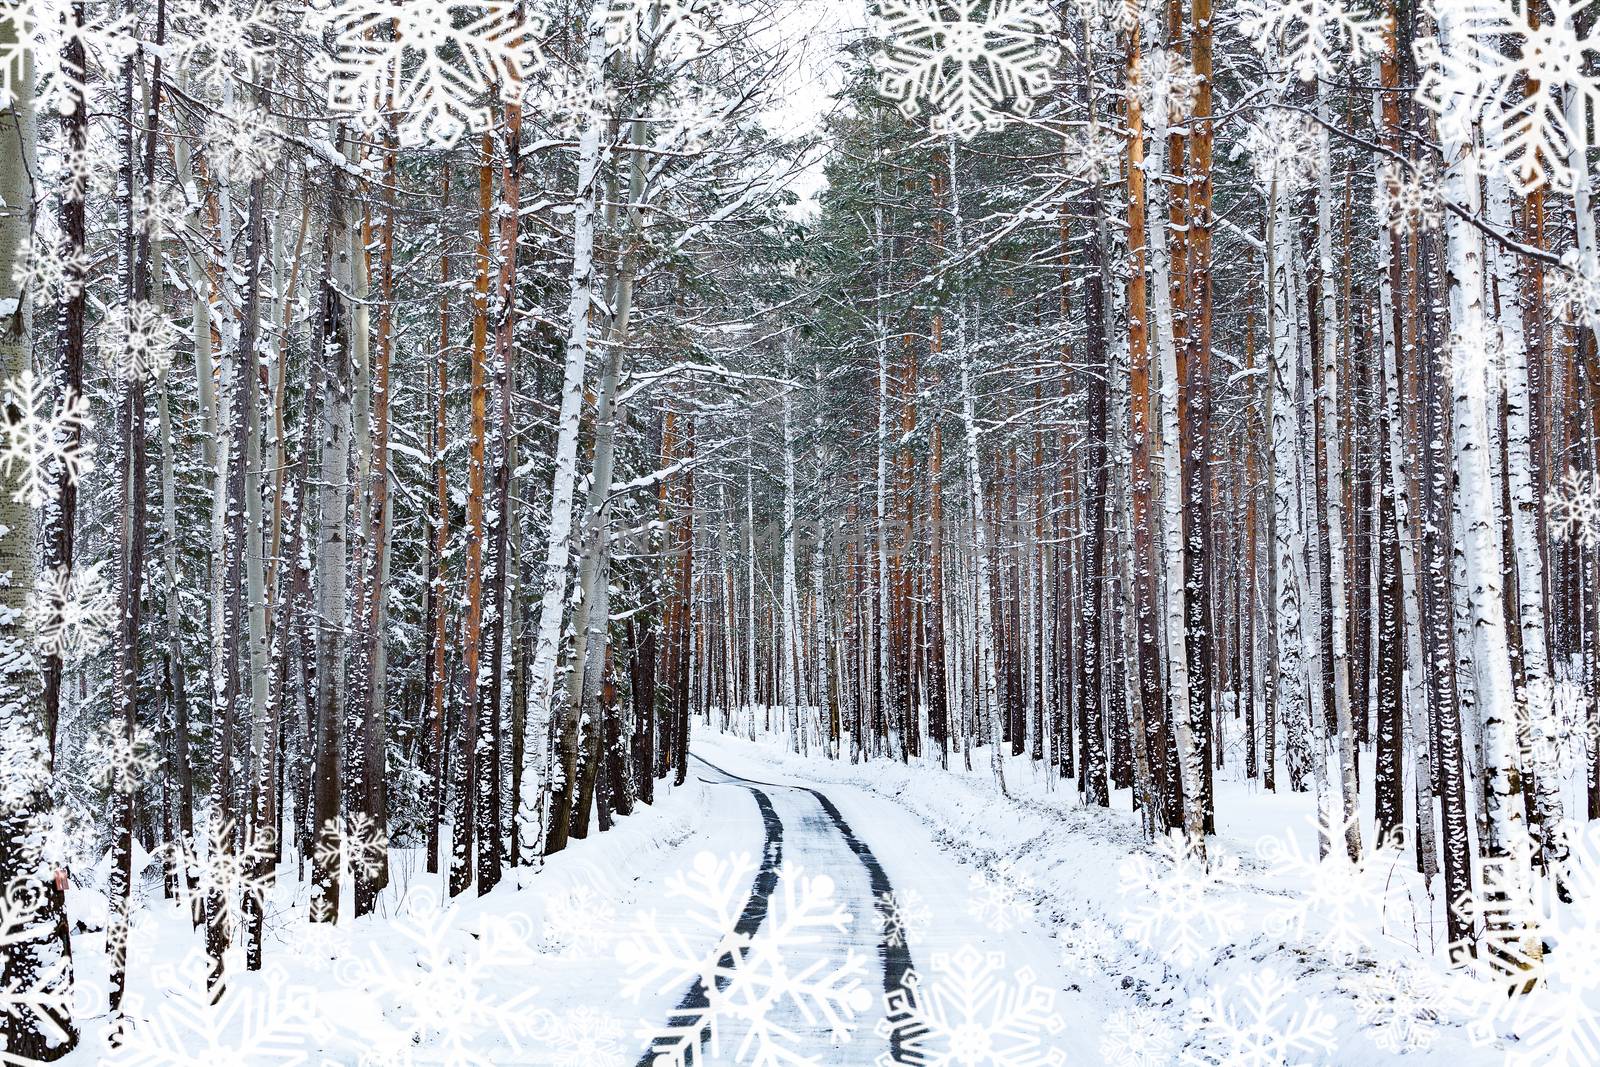 Road in winter forest. Snowcovered trees